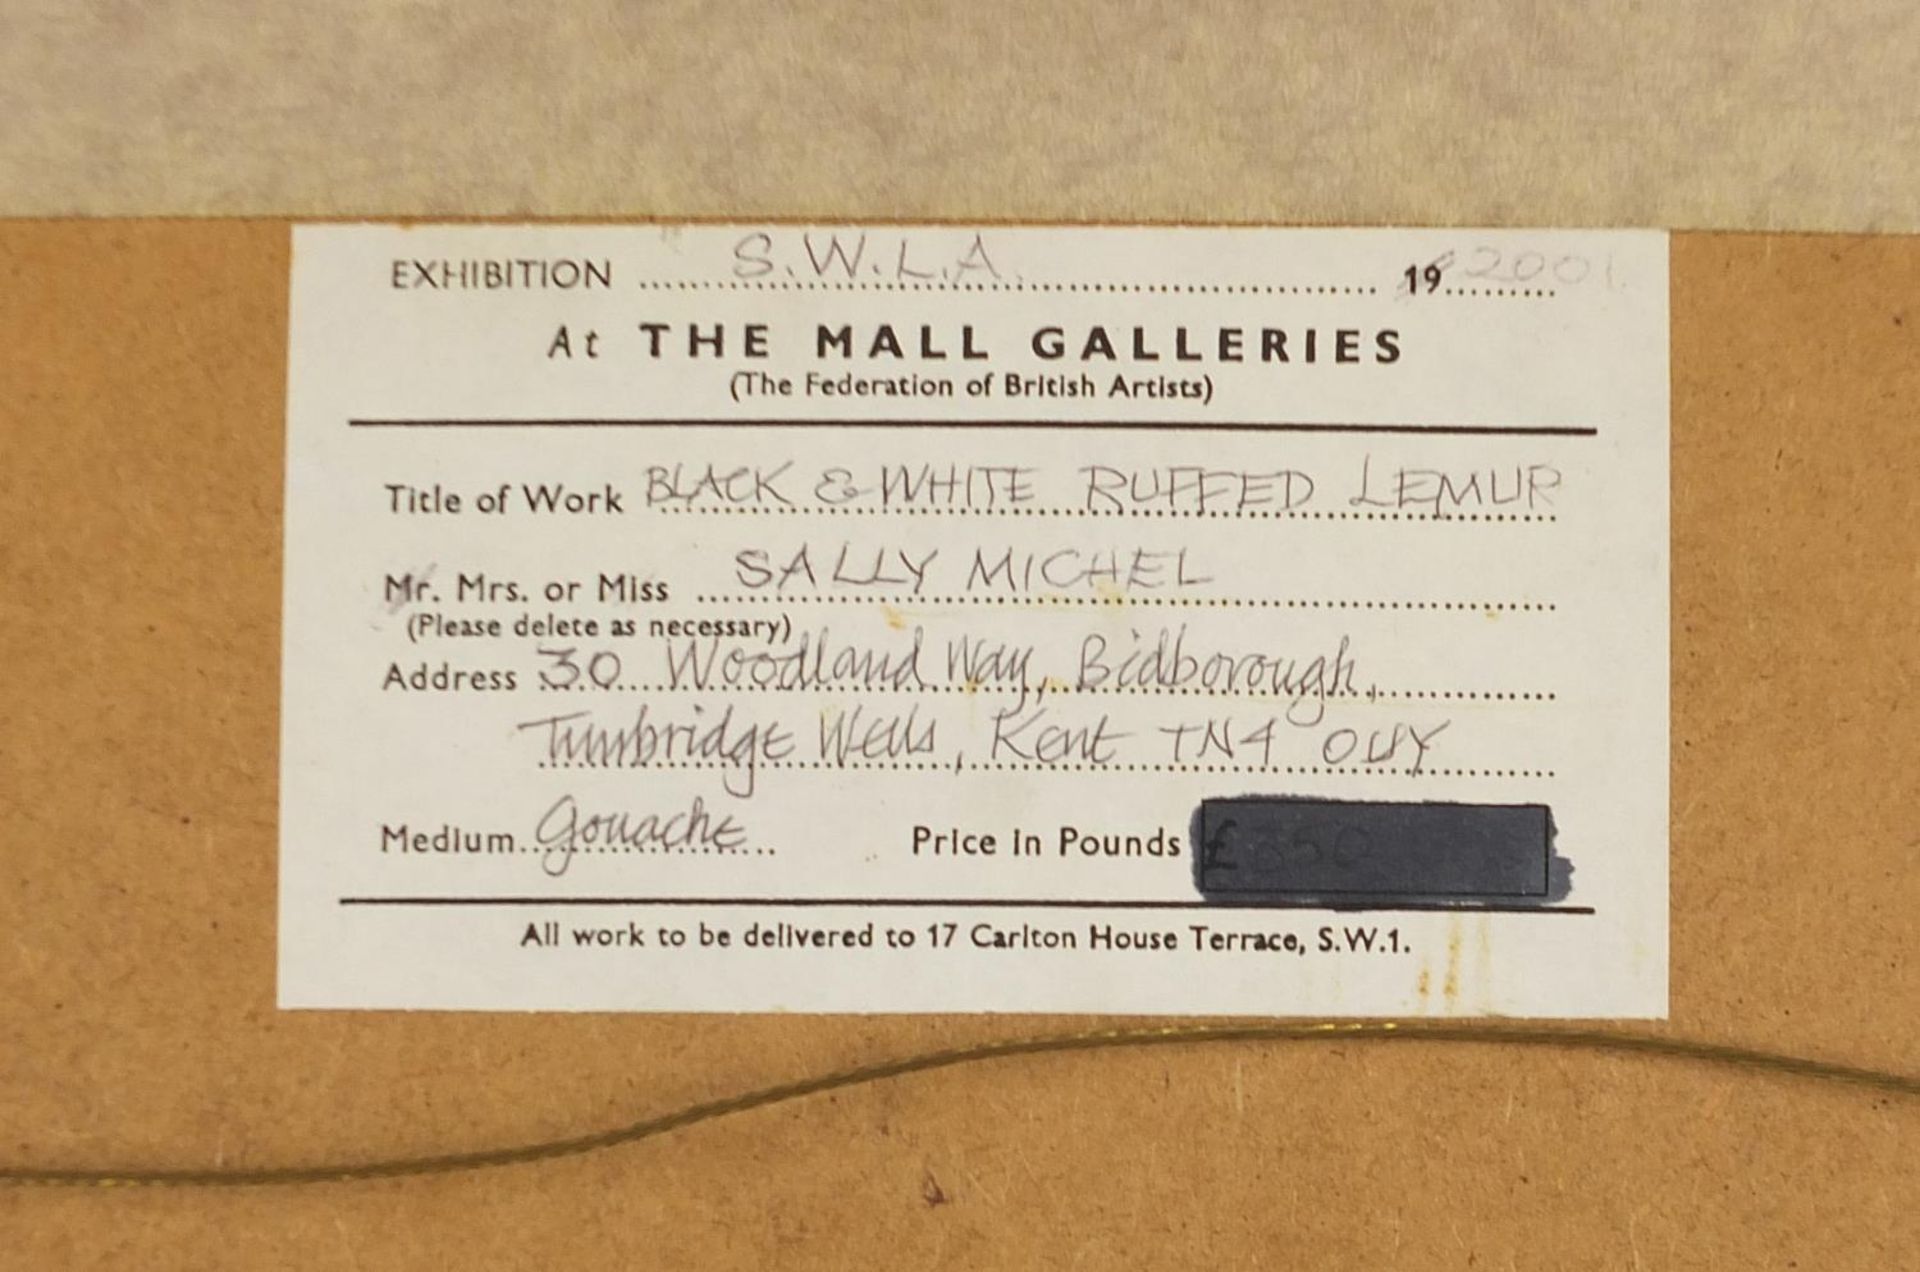 Sally Michel SWLA - Black and white ruffed lemur, signed gouache, exhibition label verso, mounted, - Image 5 of 5